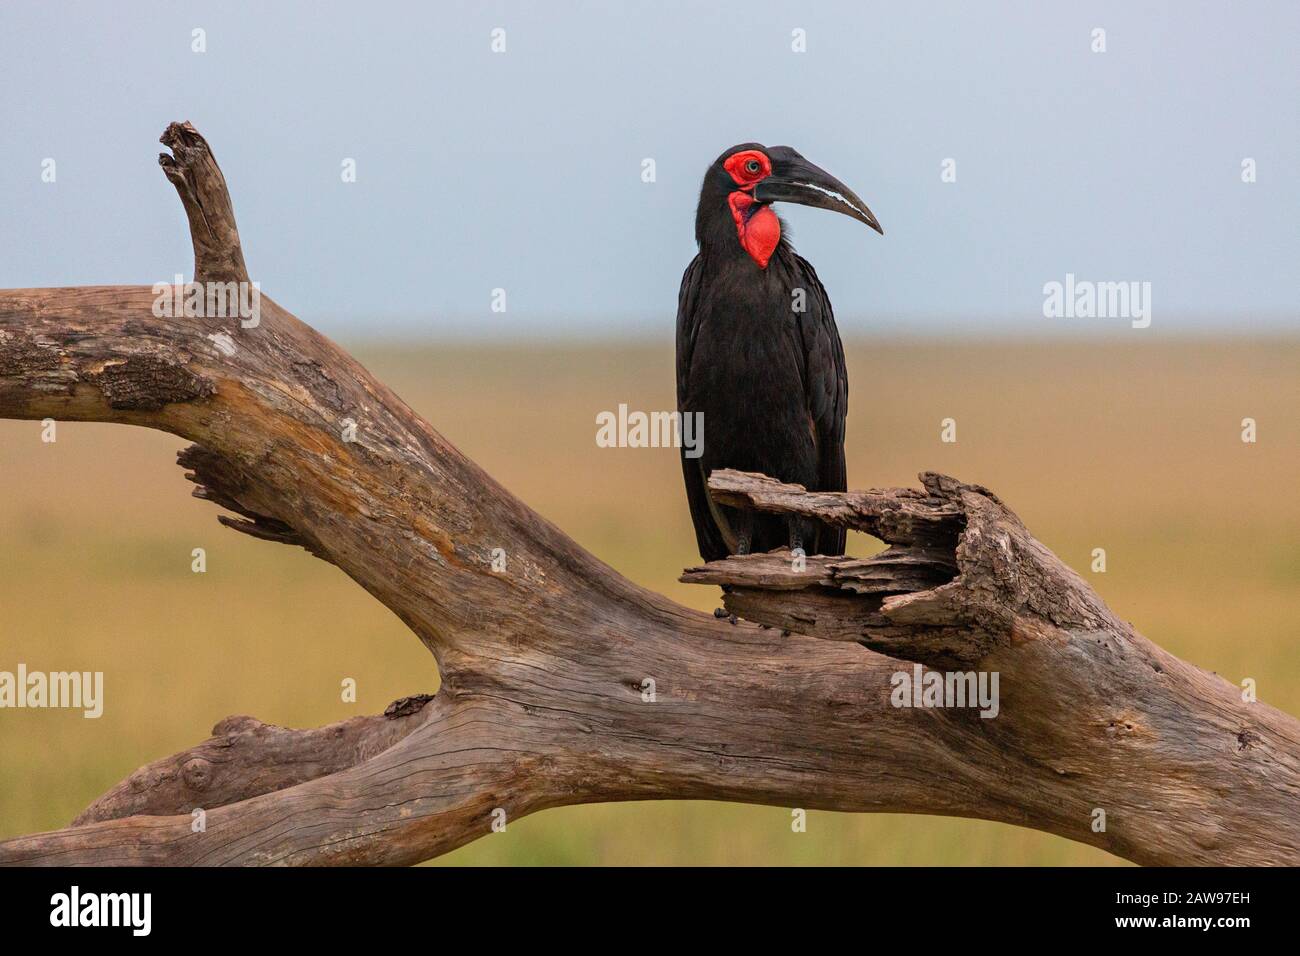 Southern Ground Hornbill on a dead tree trunk Stock Photo